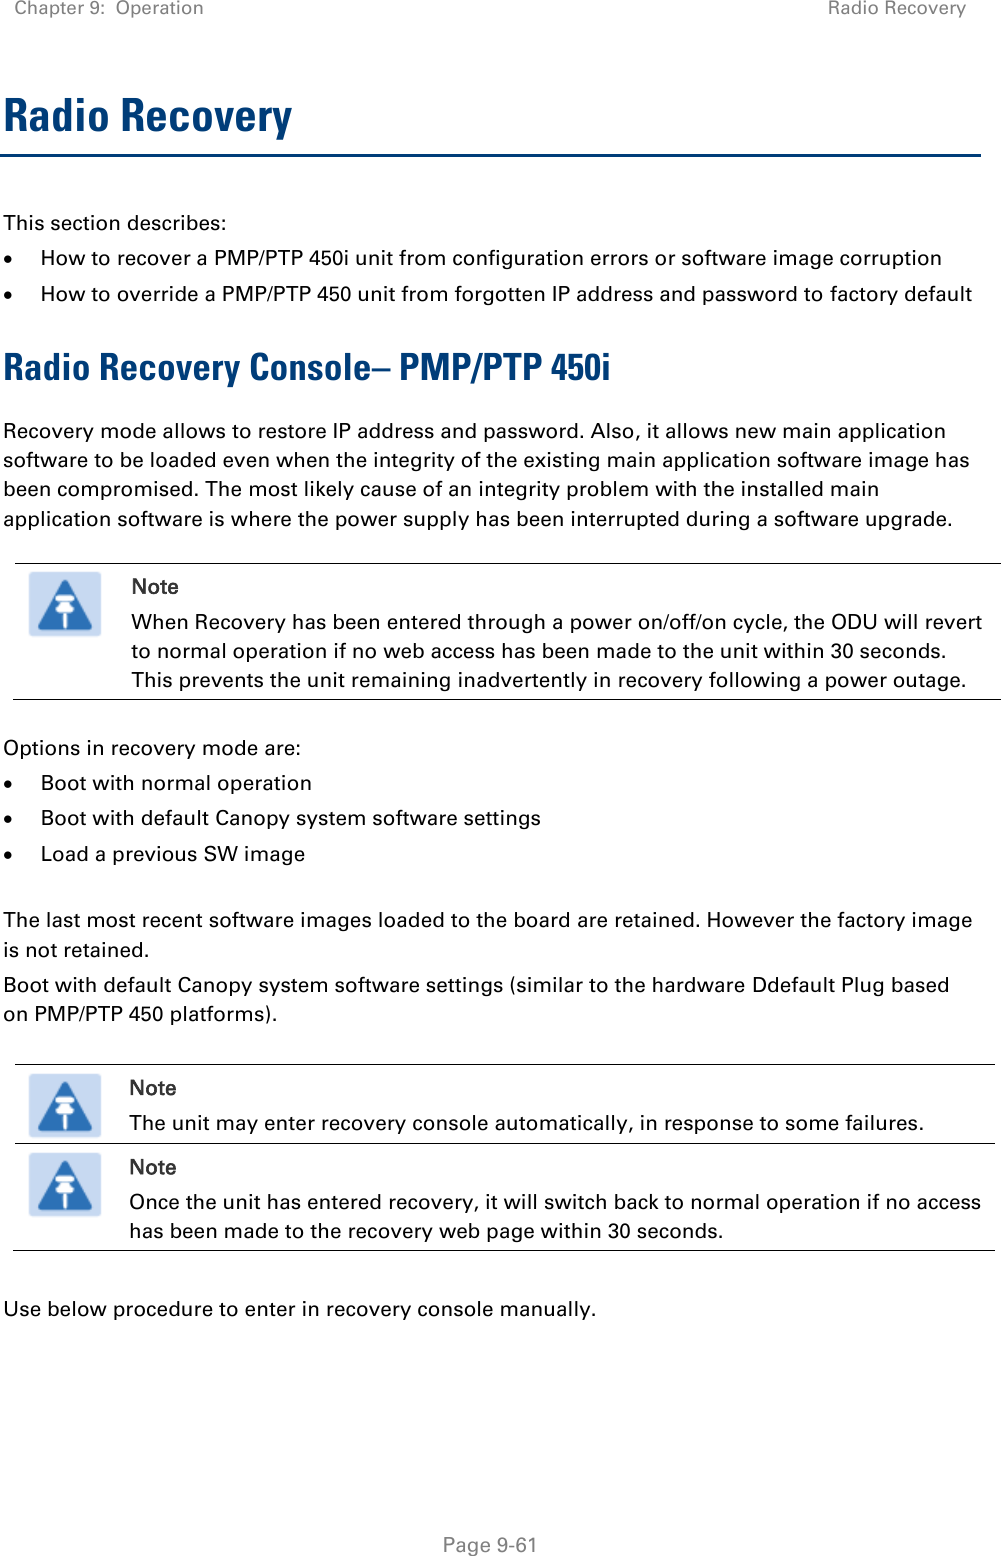 Chapter 9:  Operation Radio Recovery   Page 9-61 Radio Recovery  This section describes:  How to recover a PMP/PTP 450i unit from configuration errors or software image corruption  How to override a PMP/PTP 450 unit from forgotten IP address and password to factory default Radio Recovery Console– PMP/PTP 450i Recovery mode allows to restore IP address and password. Also, it allows new main application software to be loaded even when the integrity of the existing main application software image has been compromised. The most likely cause of an integrity problem with the installed main application software is where the power supply has been interrupted during a software upgrade.   Note When Recovery has been entered through a power on/off/on cycle, the ODU will revert to normal operation if no web access has been made to the unit within 30 seconds. This prevents the unit remaining inadvertently in recovery following a power outage.  Options in recovery mode are:   Boot with normal operation  Boot with default Canopy system software settings  Load a previous SW image  The last most recent software images loaded to the board are retained. However the factory image is not retained. Boot with default Canopy system software settings (similar to the hardware Ddefault Plug based on PMP/PTP 450 platforms).   Note The unit may enter recovery console automatically, in response to some failures.  Note Once the unit has entered recovery, it will switch back to normal operation if no access has been made to the recovery web page within 30 seconds.  Use below procedure to enter in recovery console manually.    